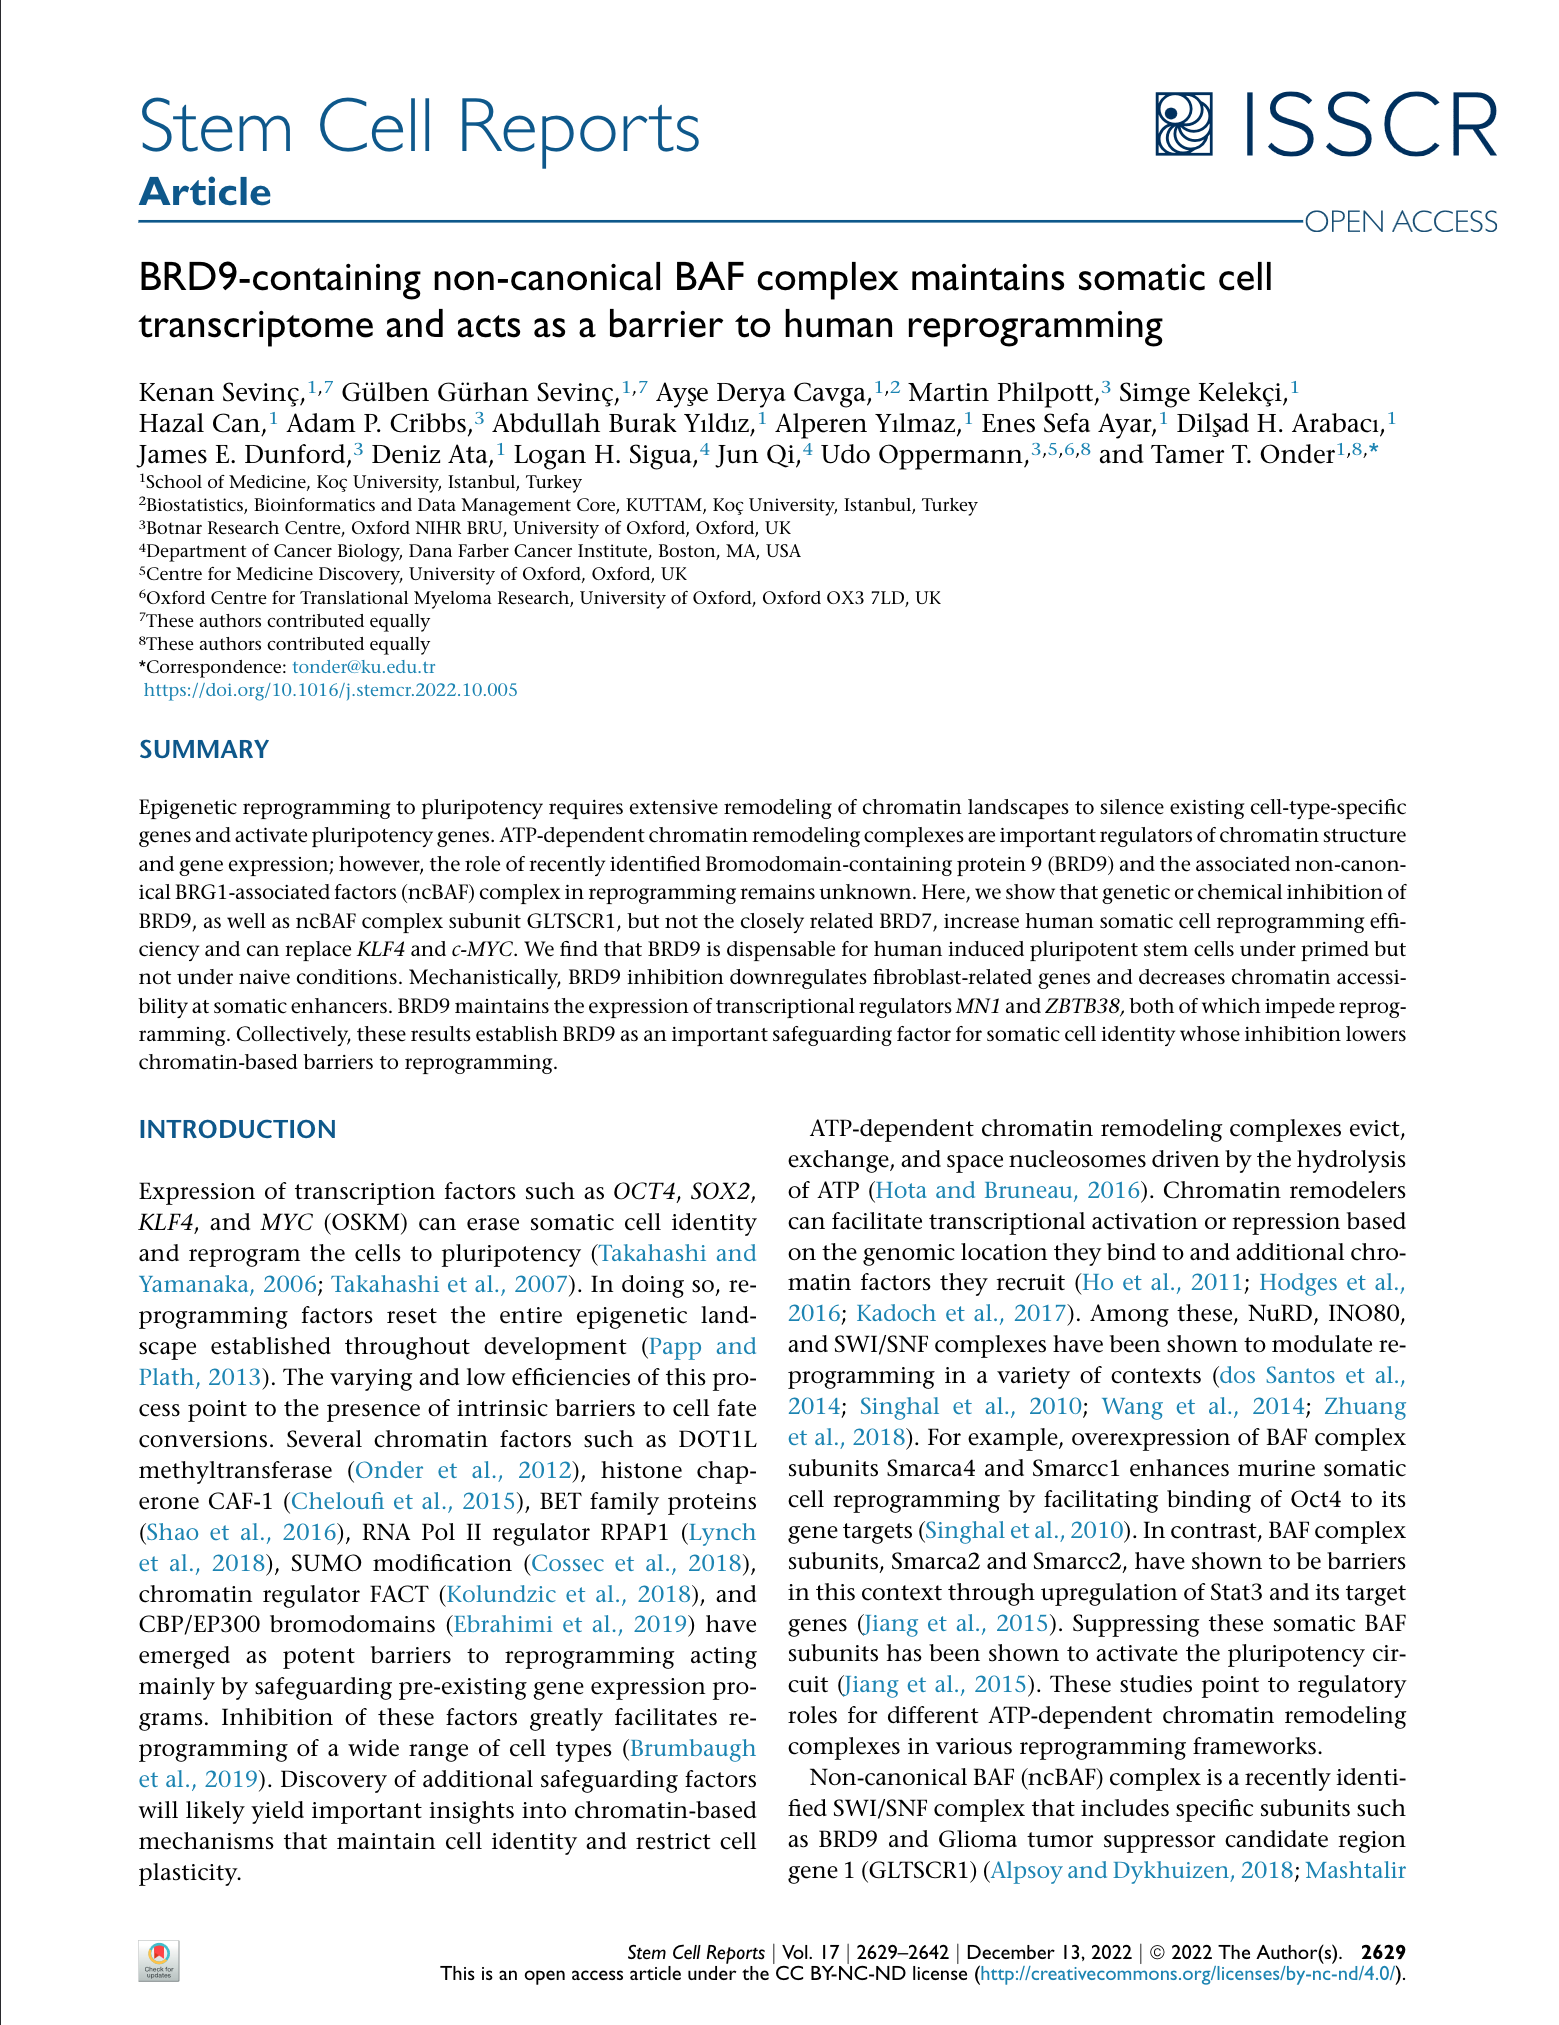 BRD9-containing non-canonical BAF complex maintains somatic cell transcriptome and acts as a barrier to human reprogramming